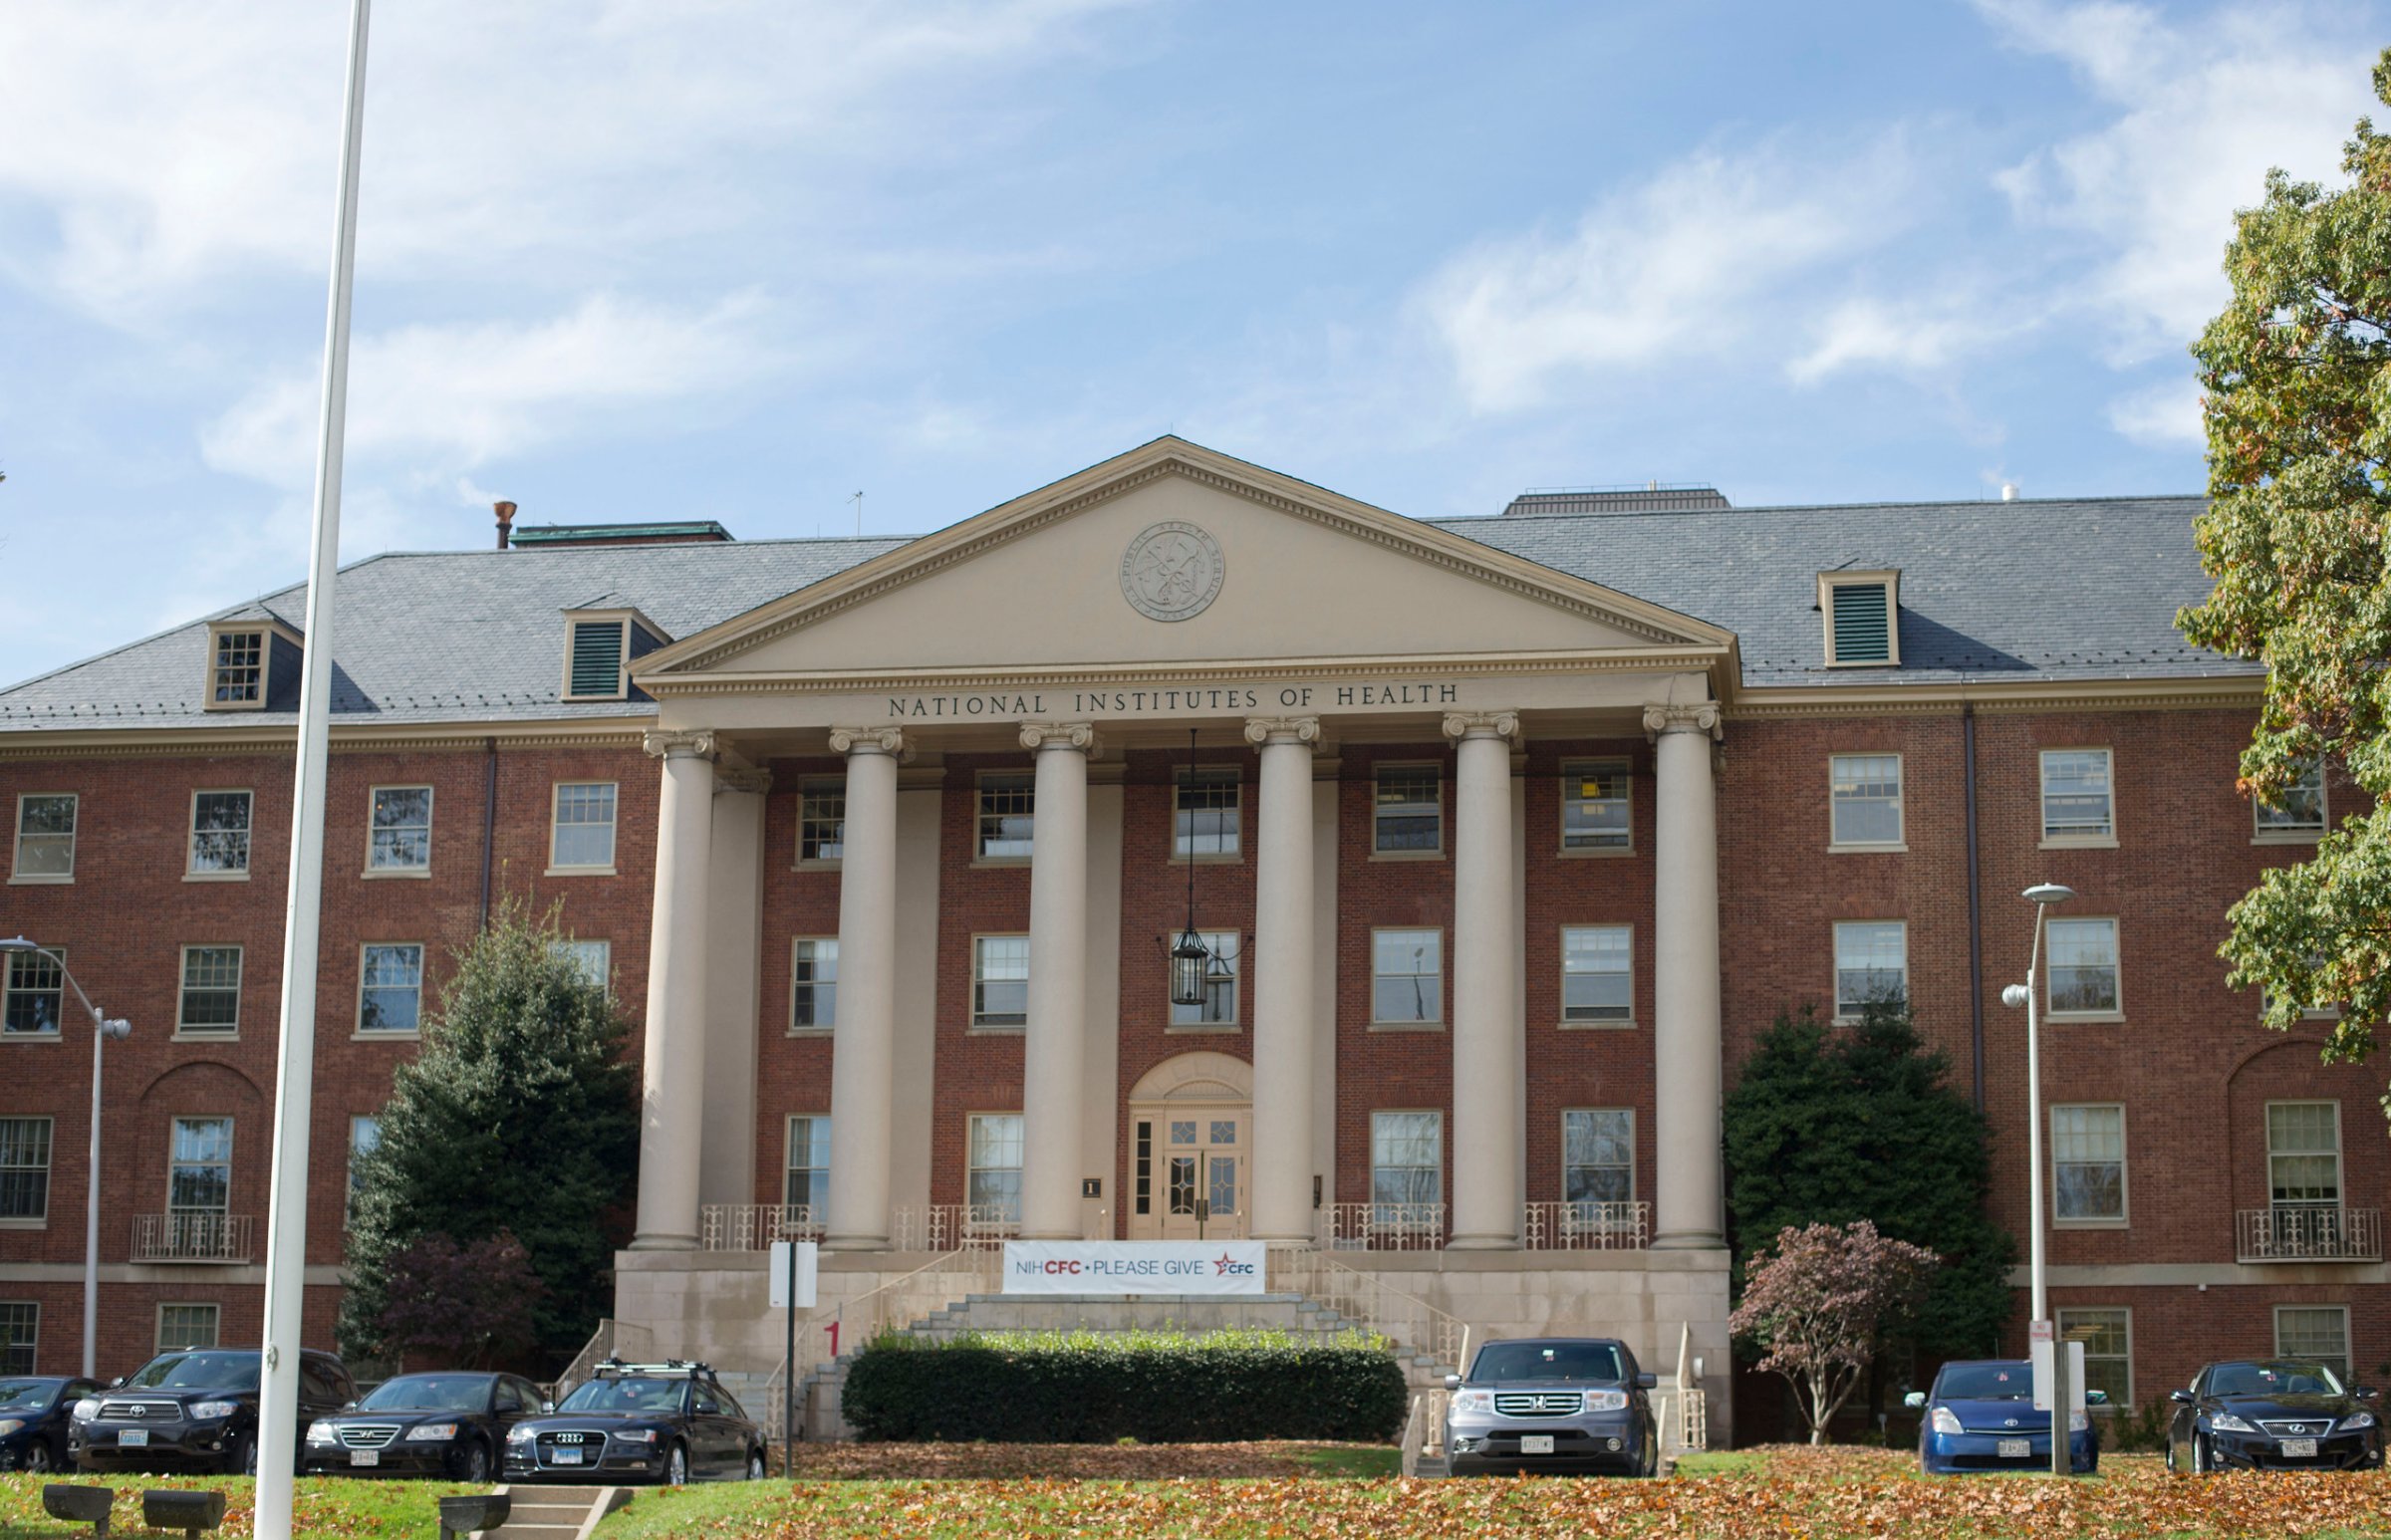 National Institutes of Health James Shannon building on the campus of NIH in Bethesda, Md., on Oct. 24, 2014.